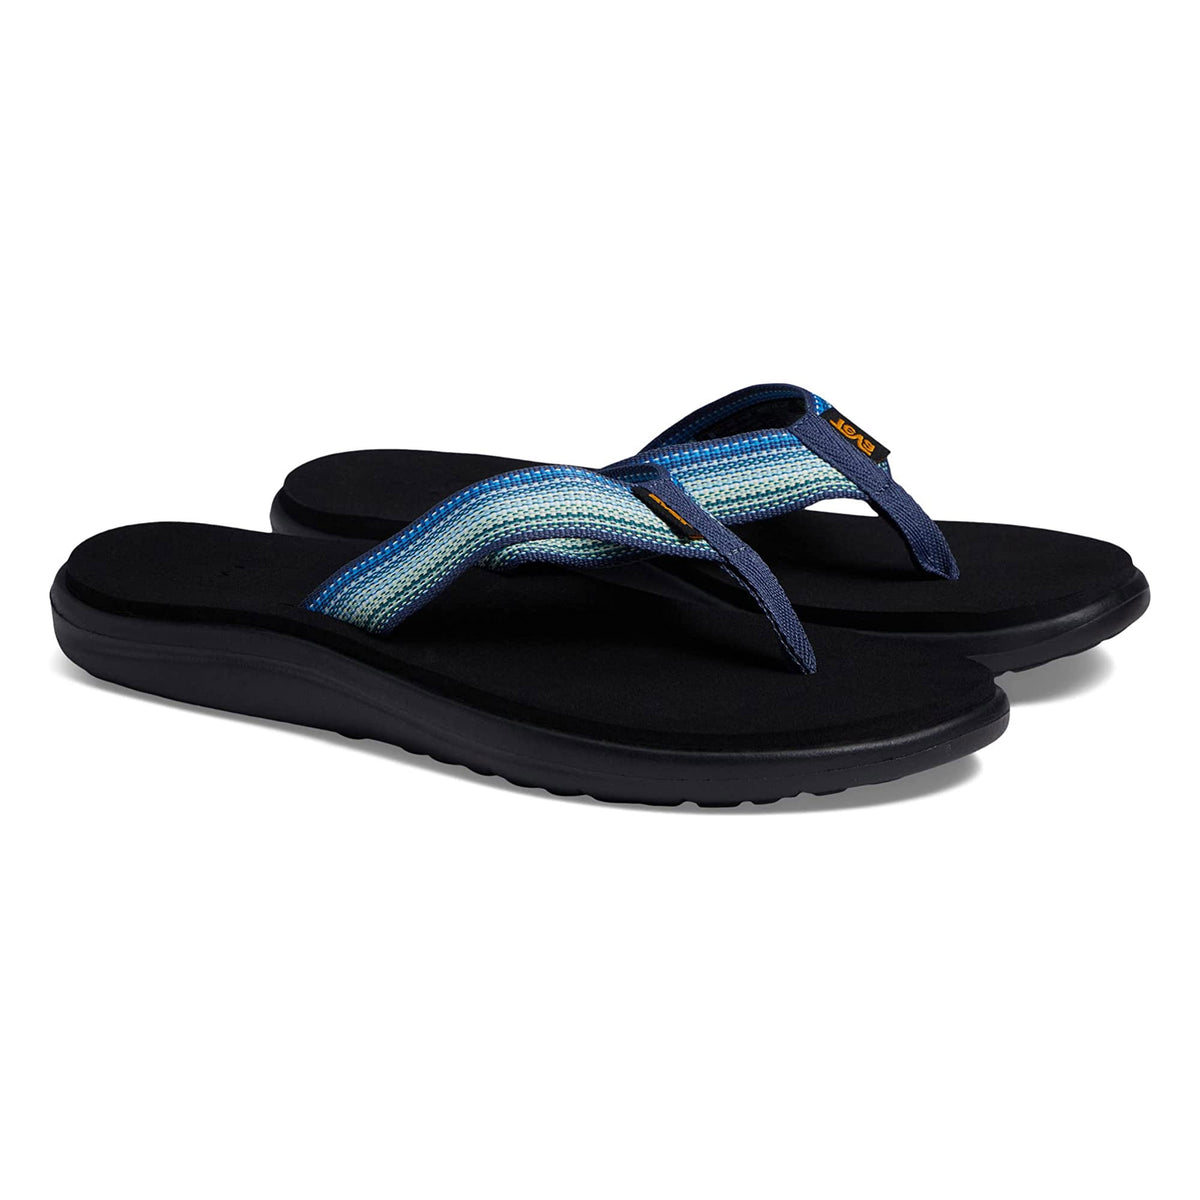 A pair of Teva Voya Flip Antigous Navy Multi sandals with black soles and blue straps, featuring a small orange logo on each strap, displayed against a white background.